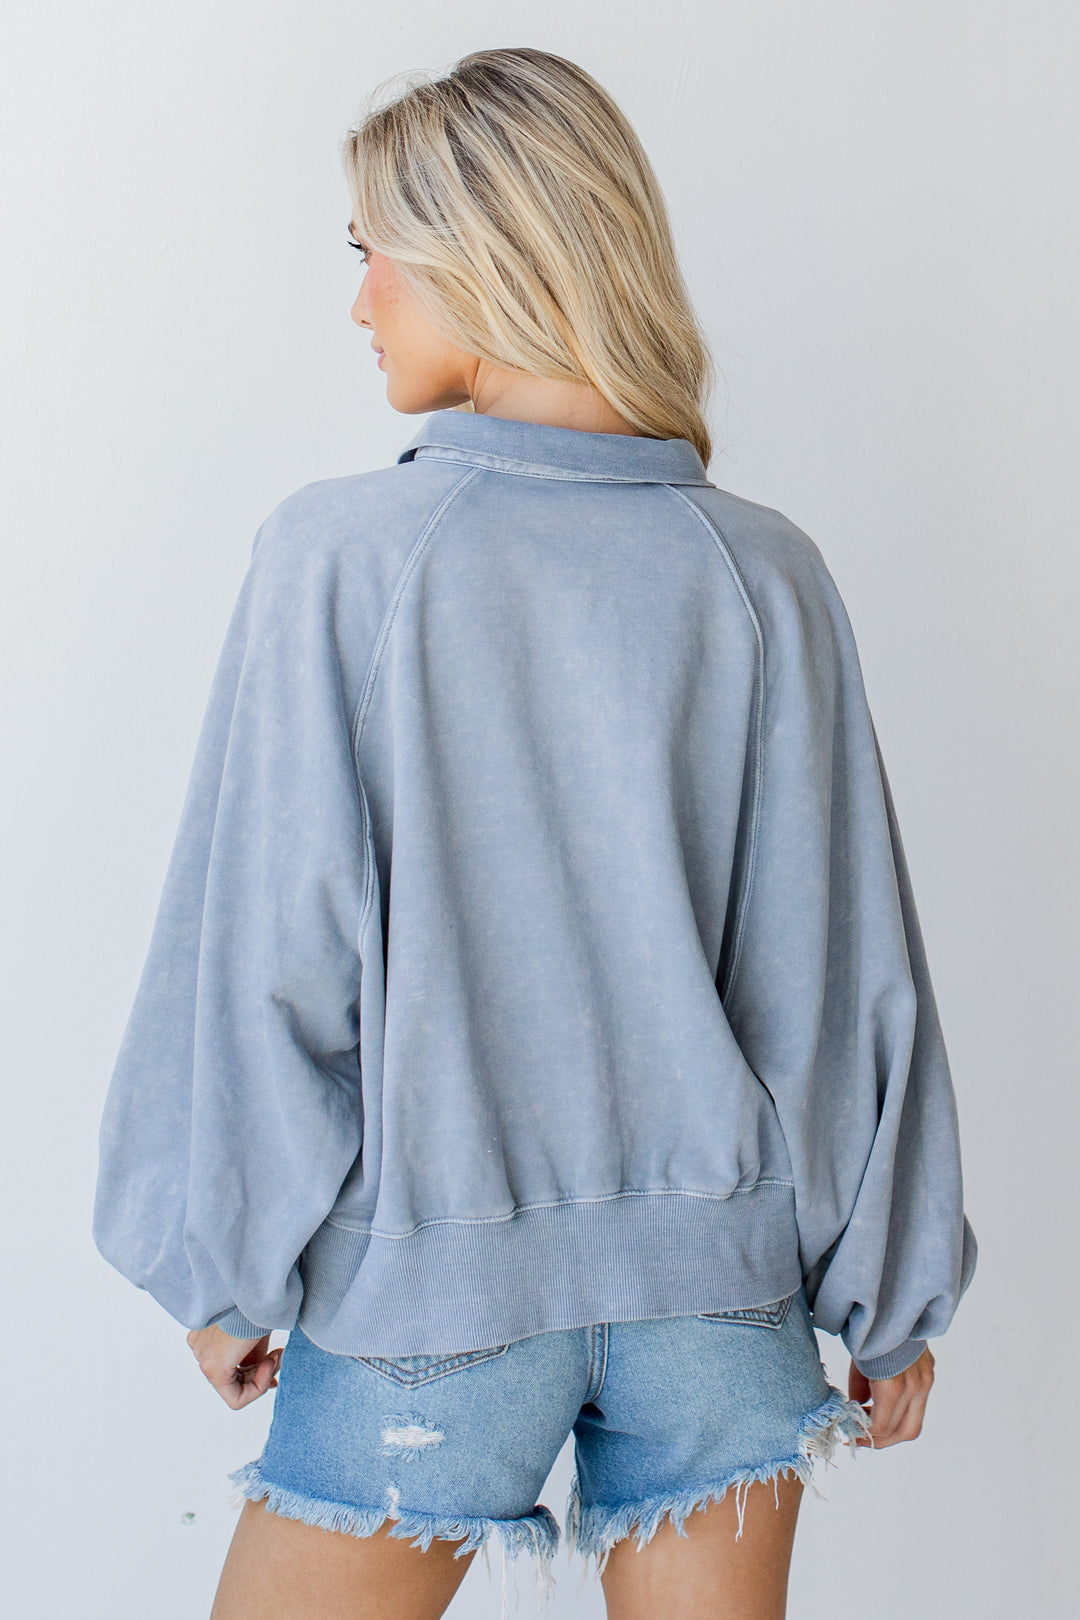 Collared Pullover in light blue back view